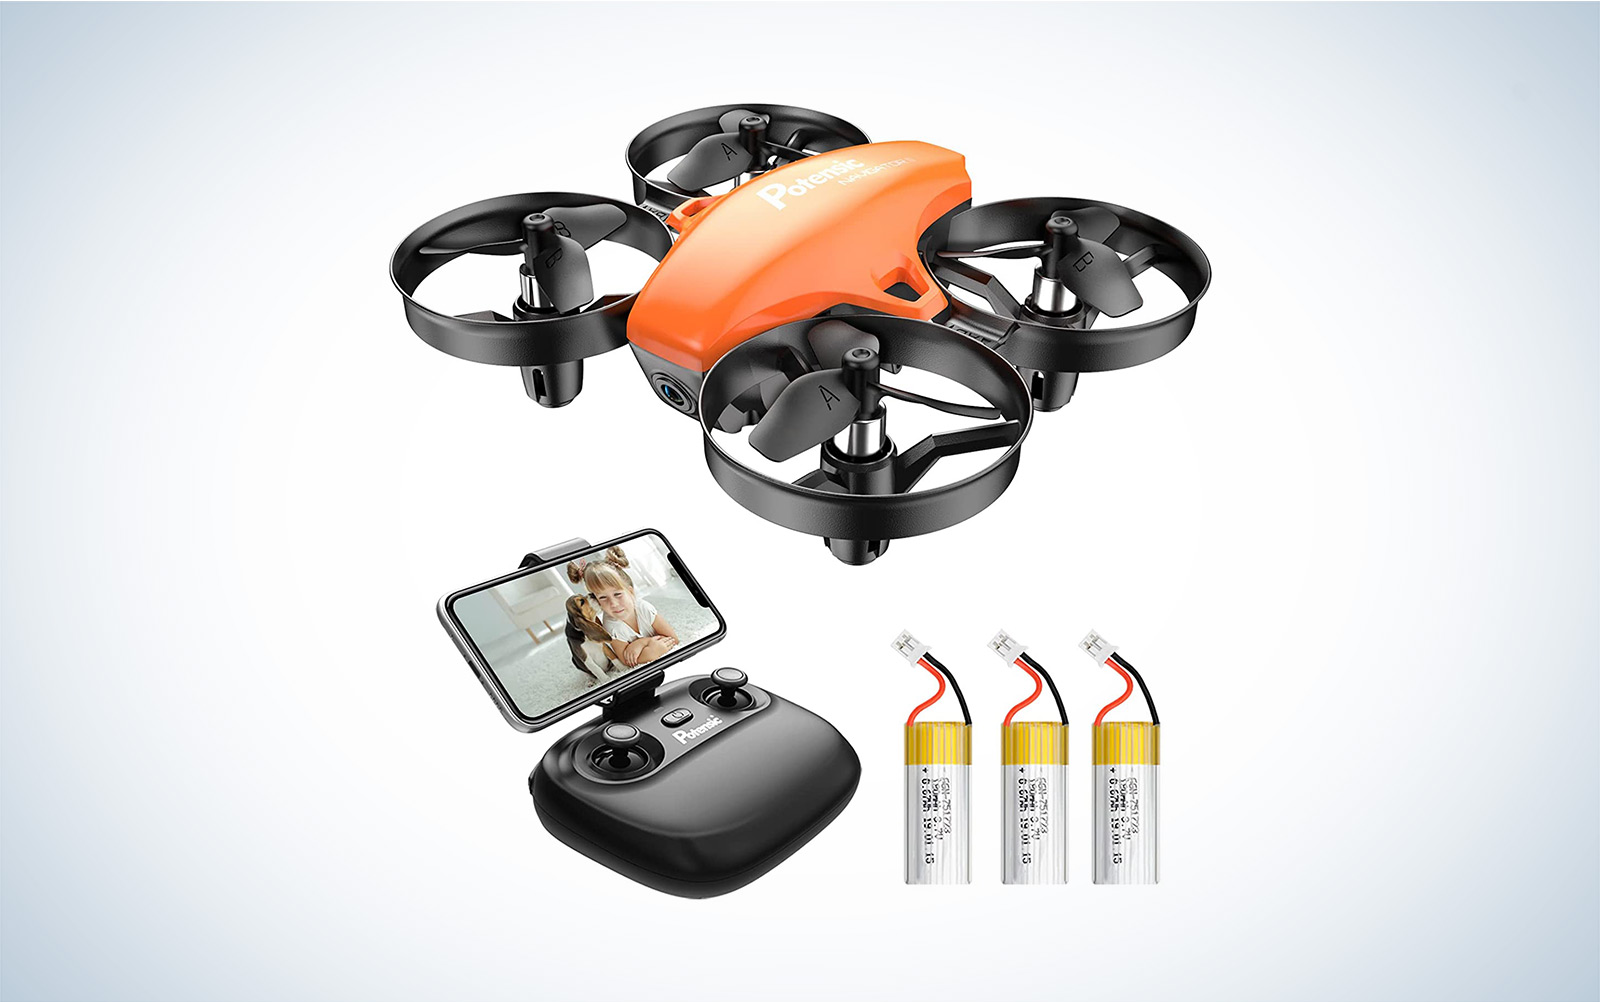 The best FPV drones for 2023